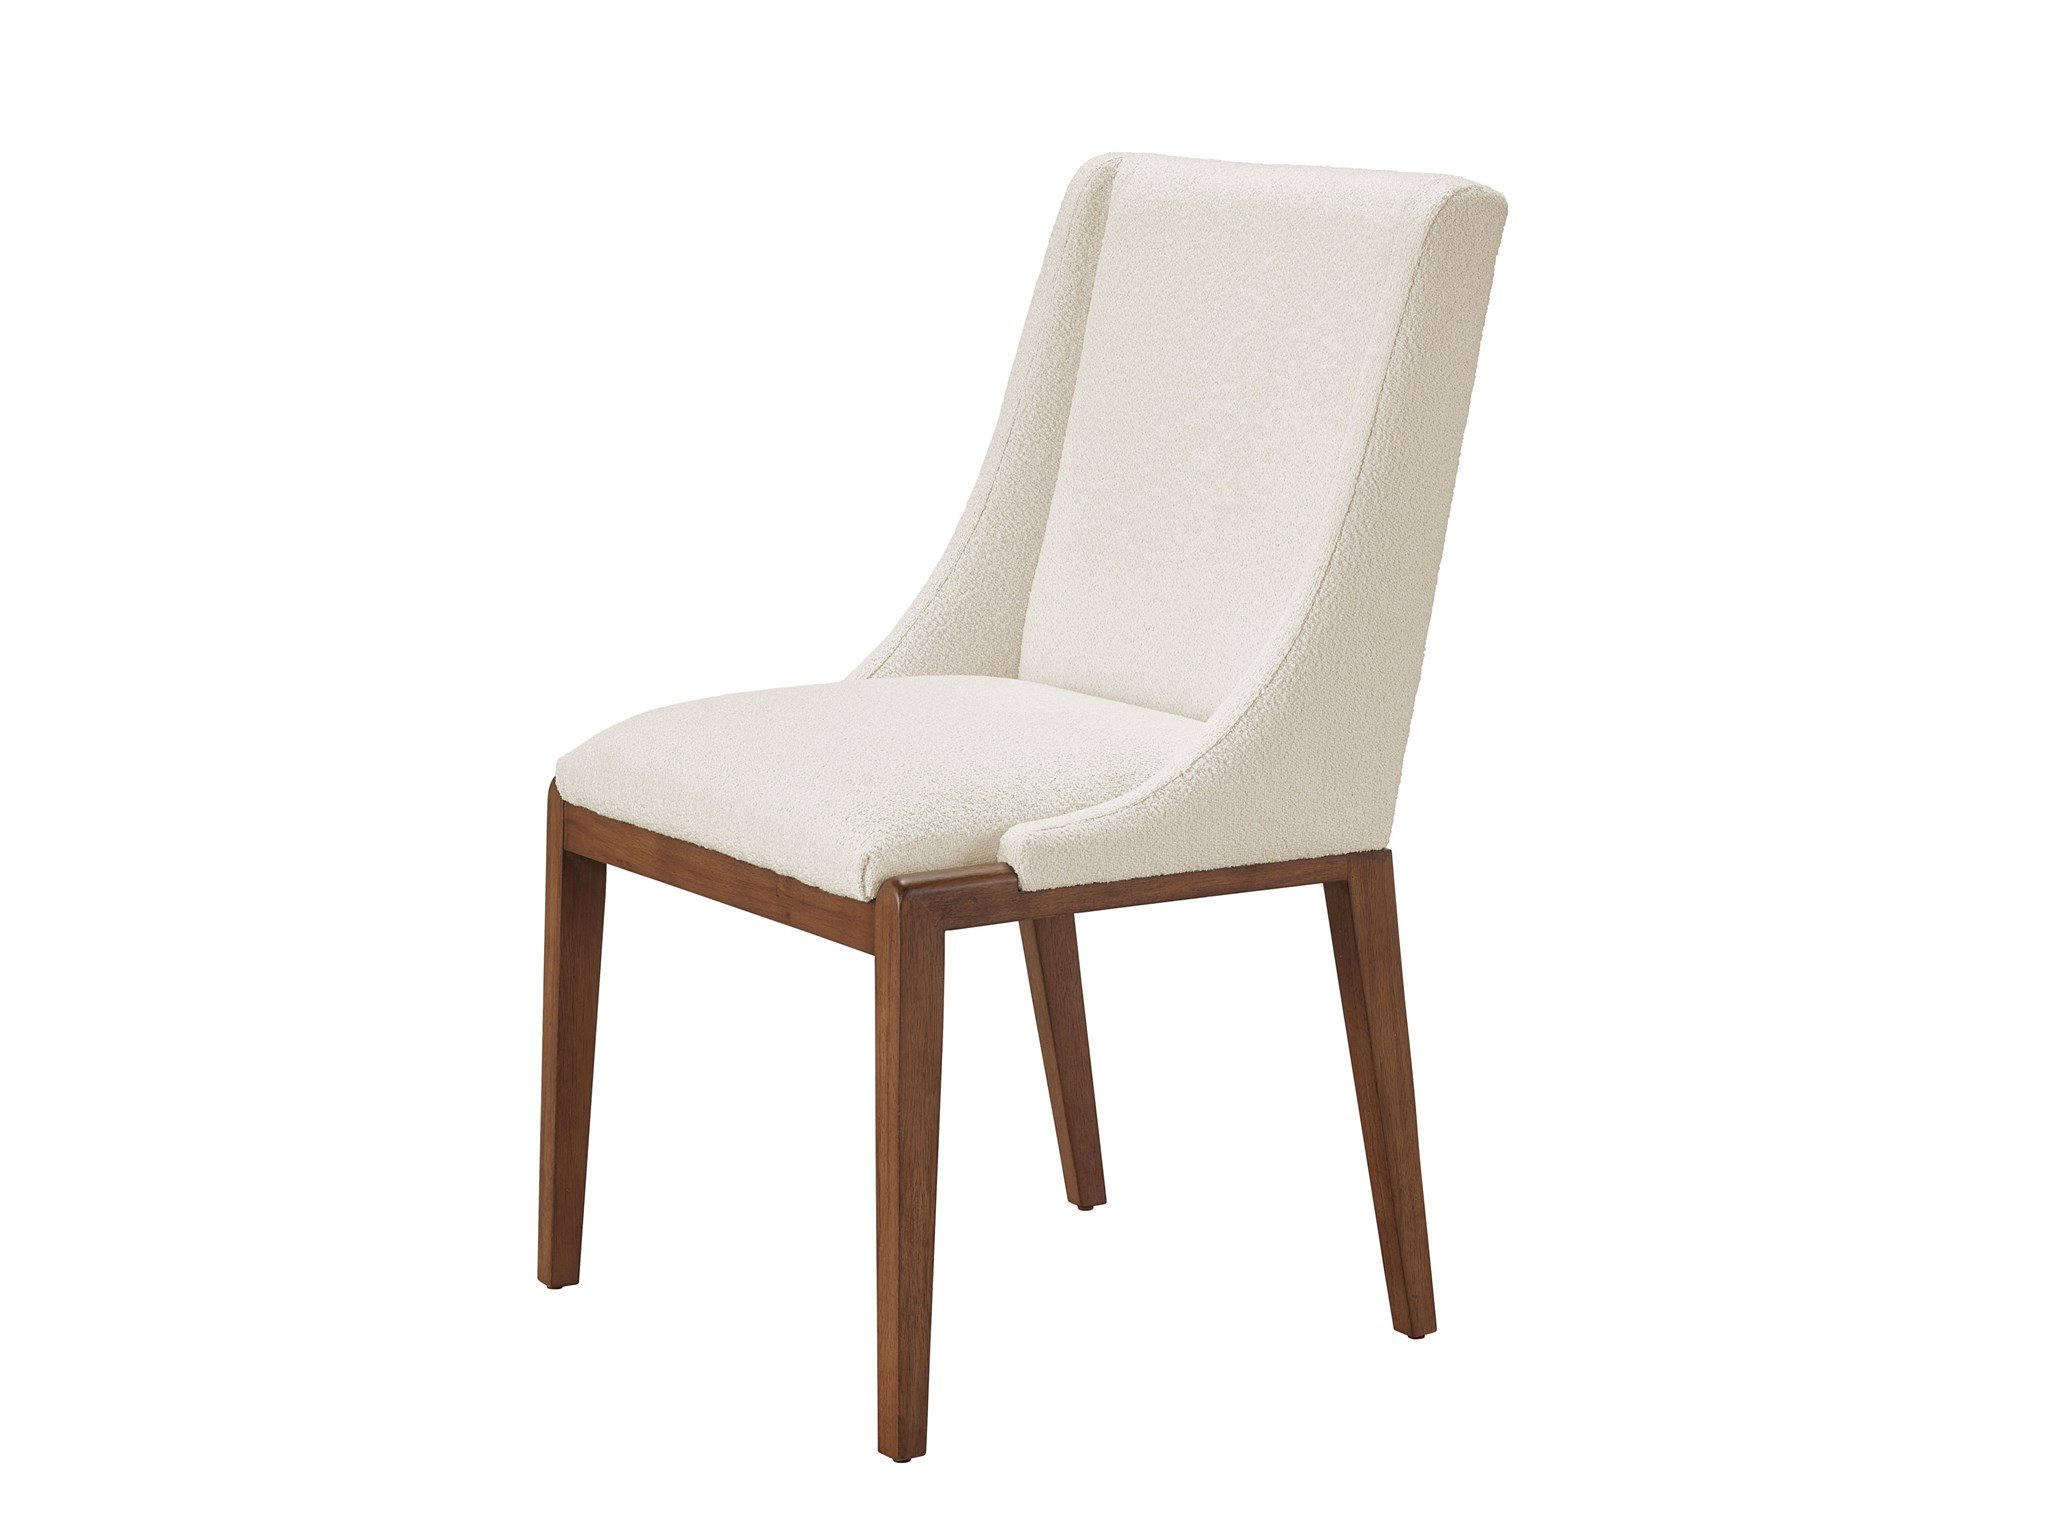 Tranquility Dining Chair